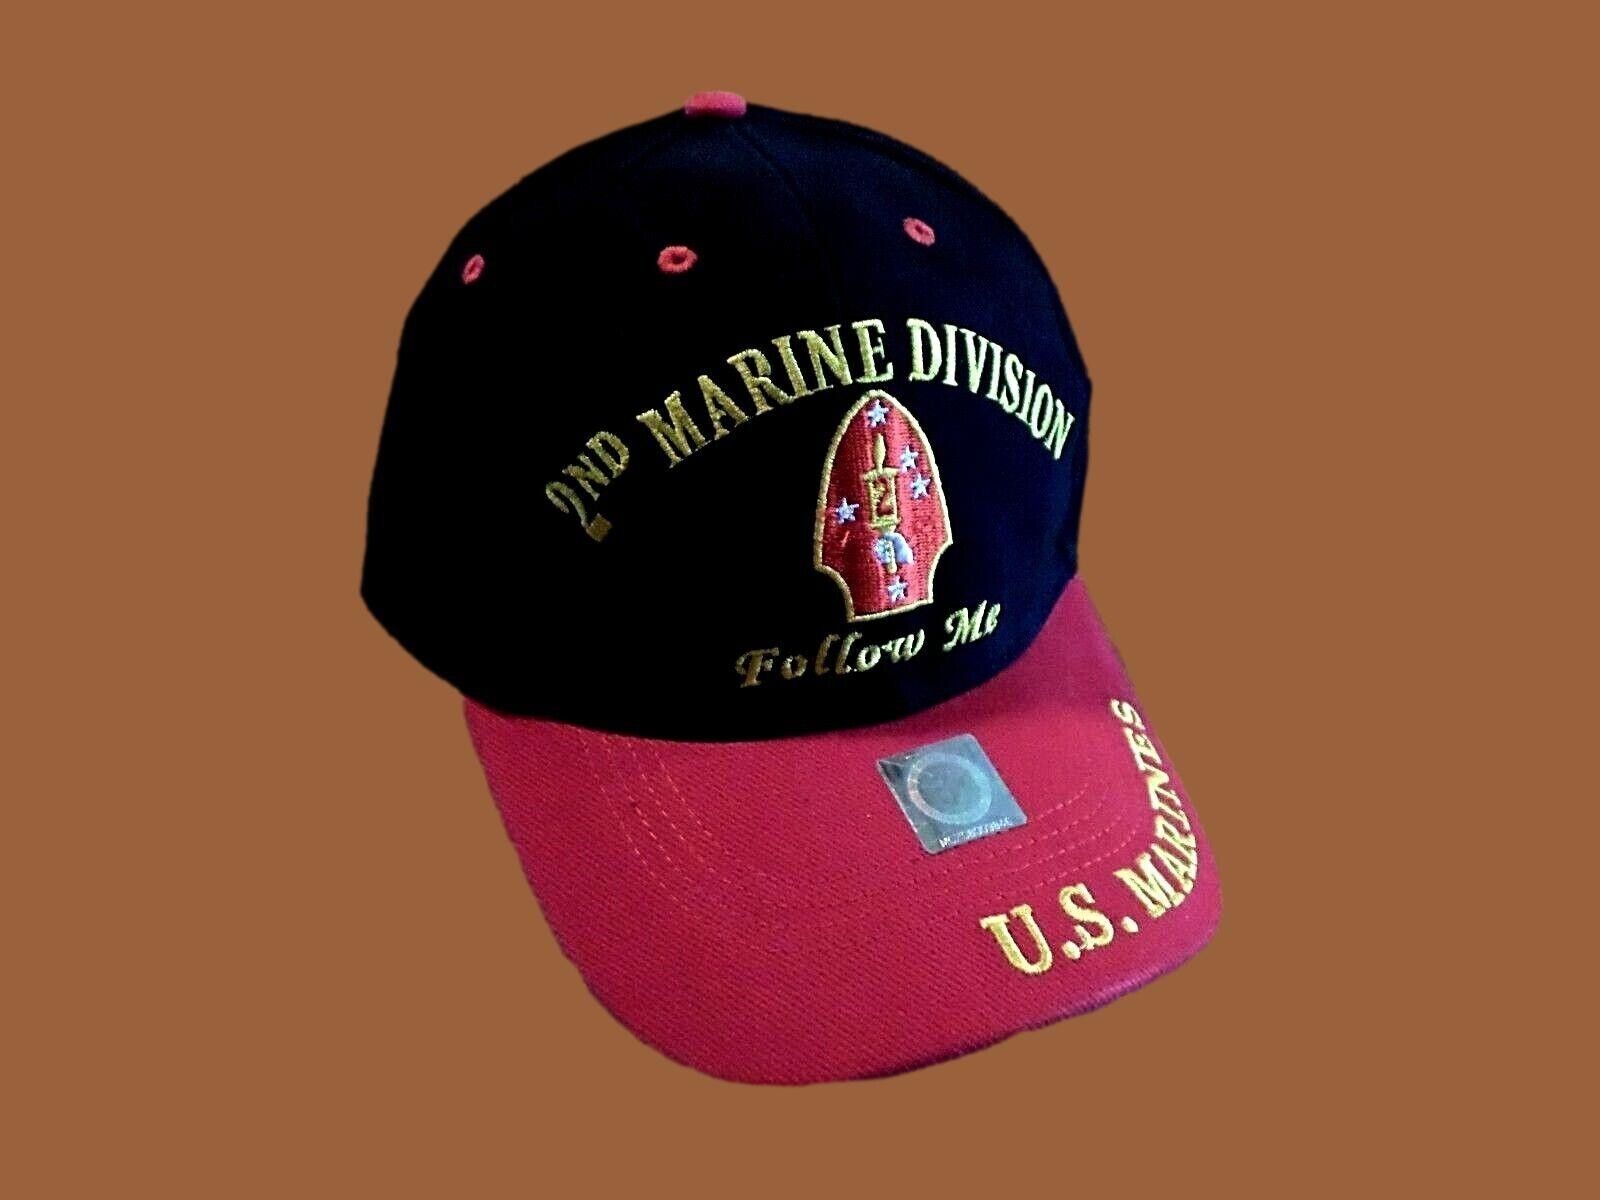 U.S Military 2nd Marine Corps Division hat ball cap Embroidered USMC Licensed